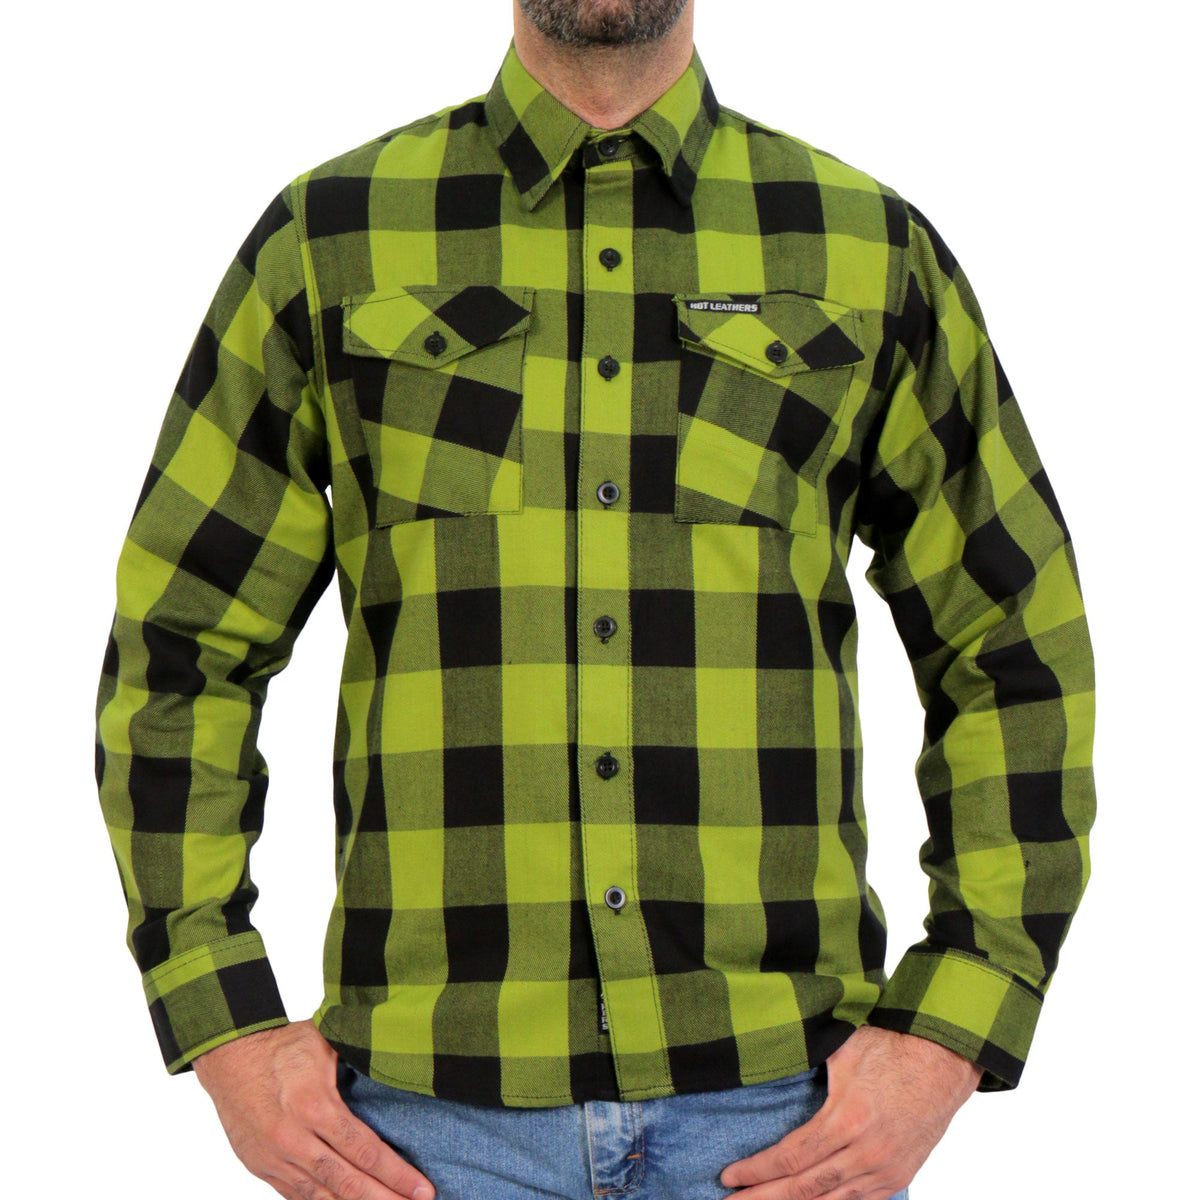 Hot Leathers FLM2015 Men's Black and Light Green Long Sleeve Flannel